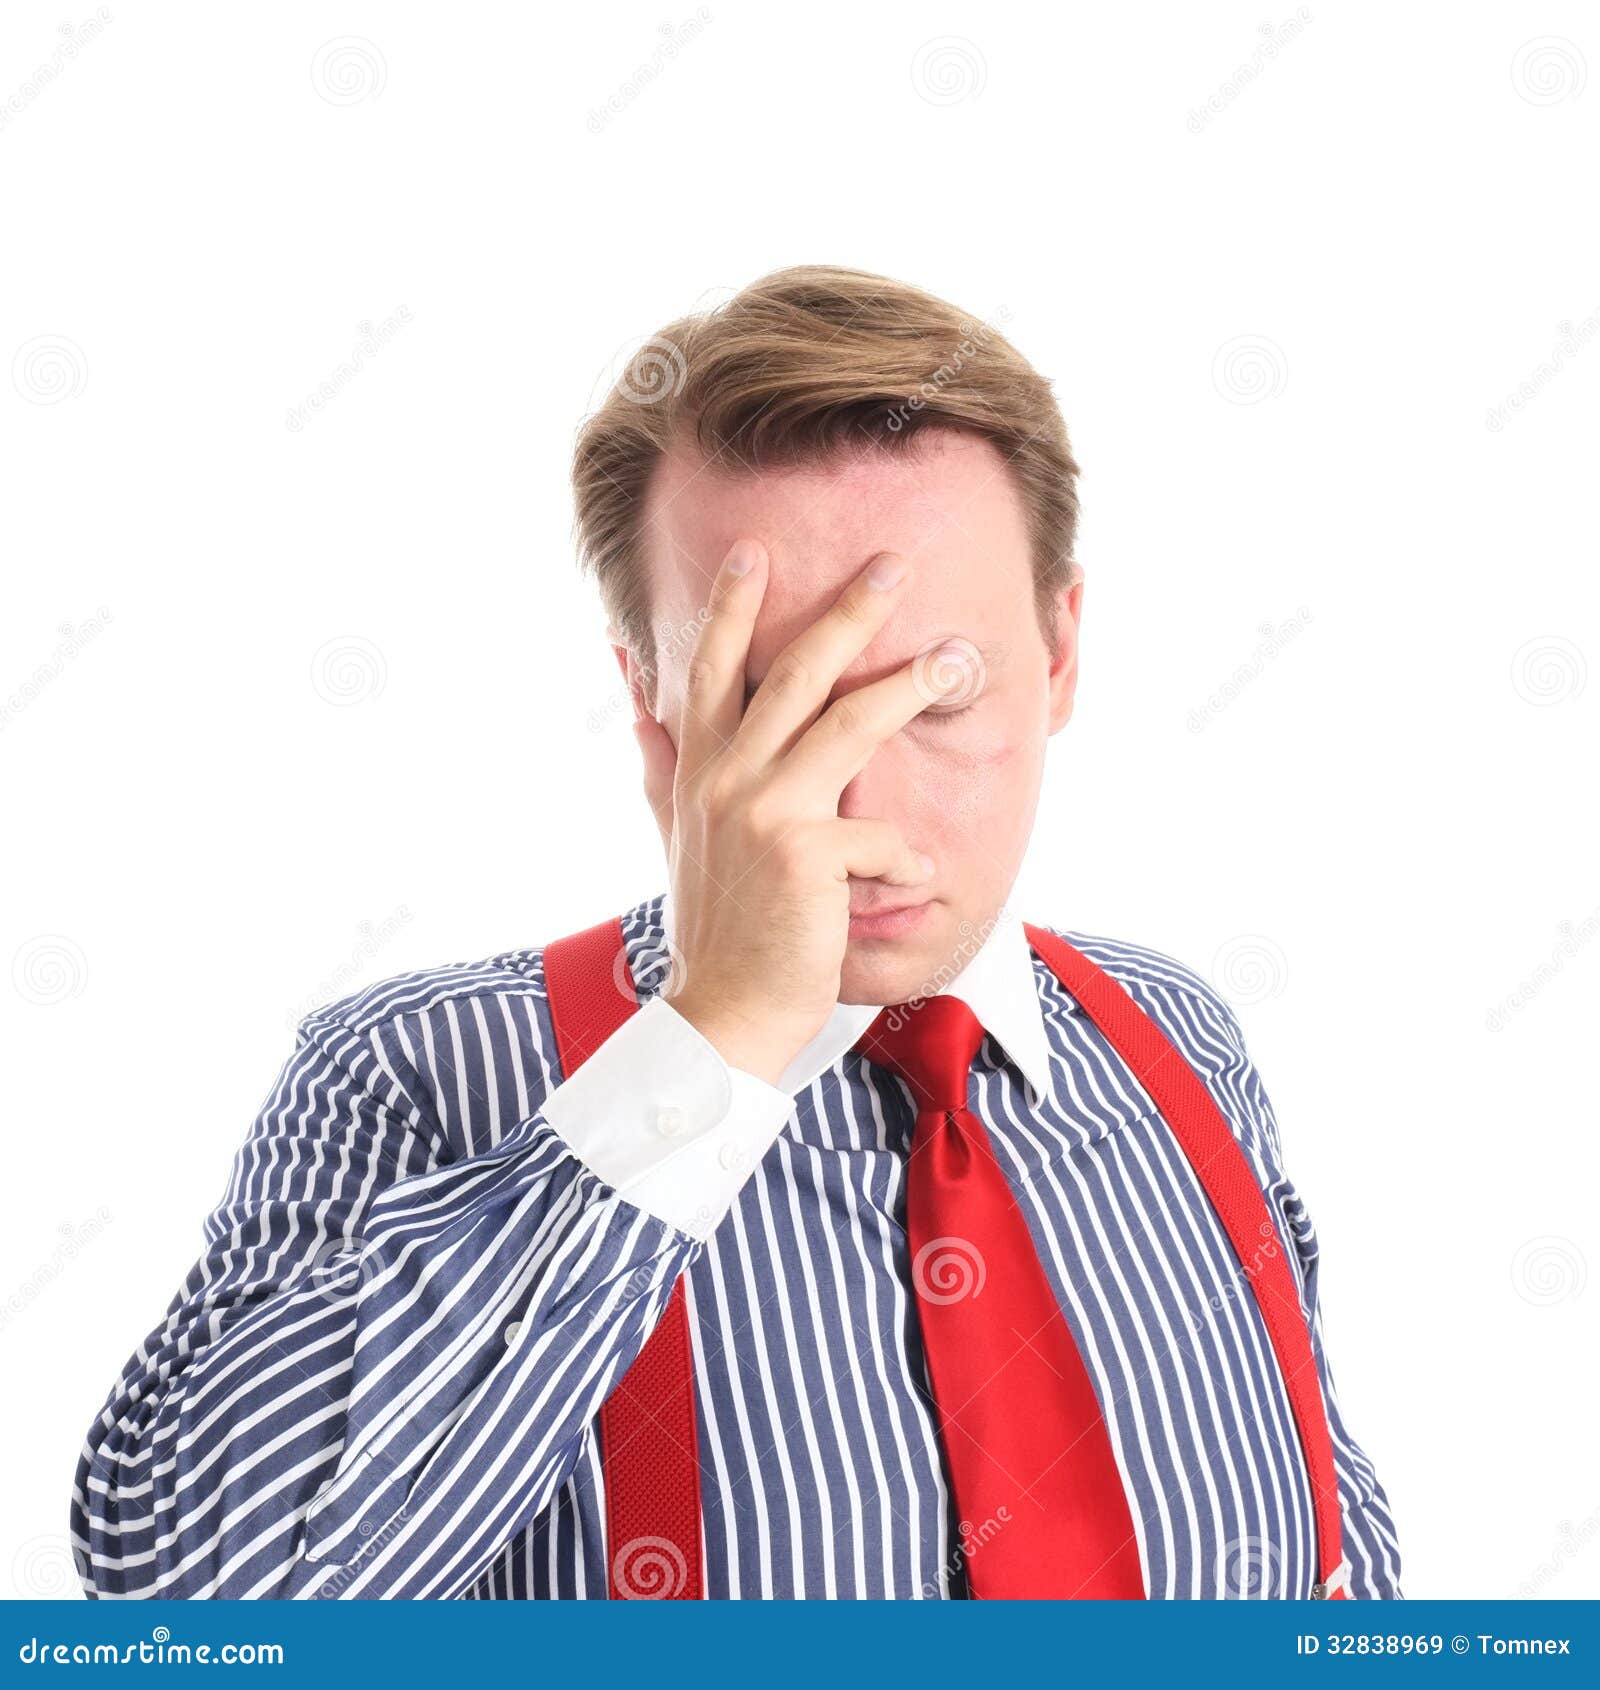 facepalm-royalty-free-stock-images-image-32838969